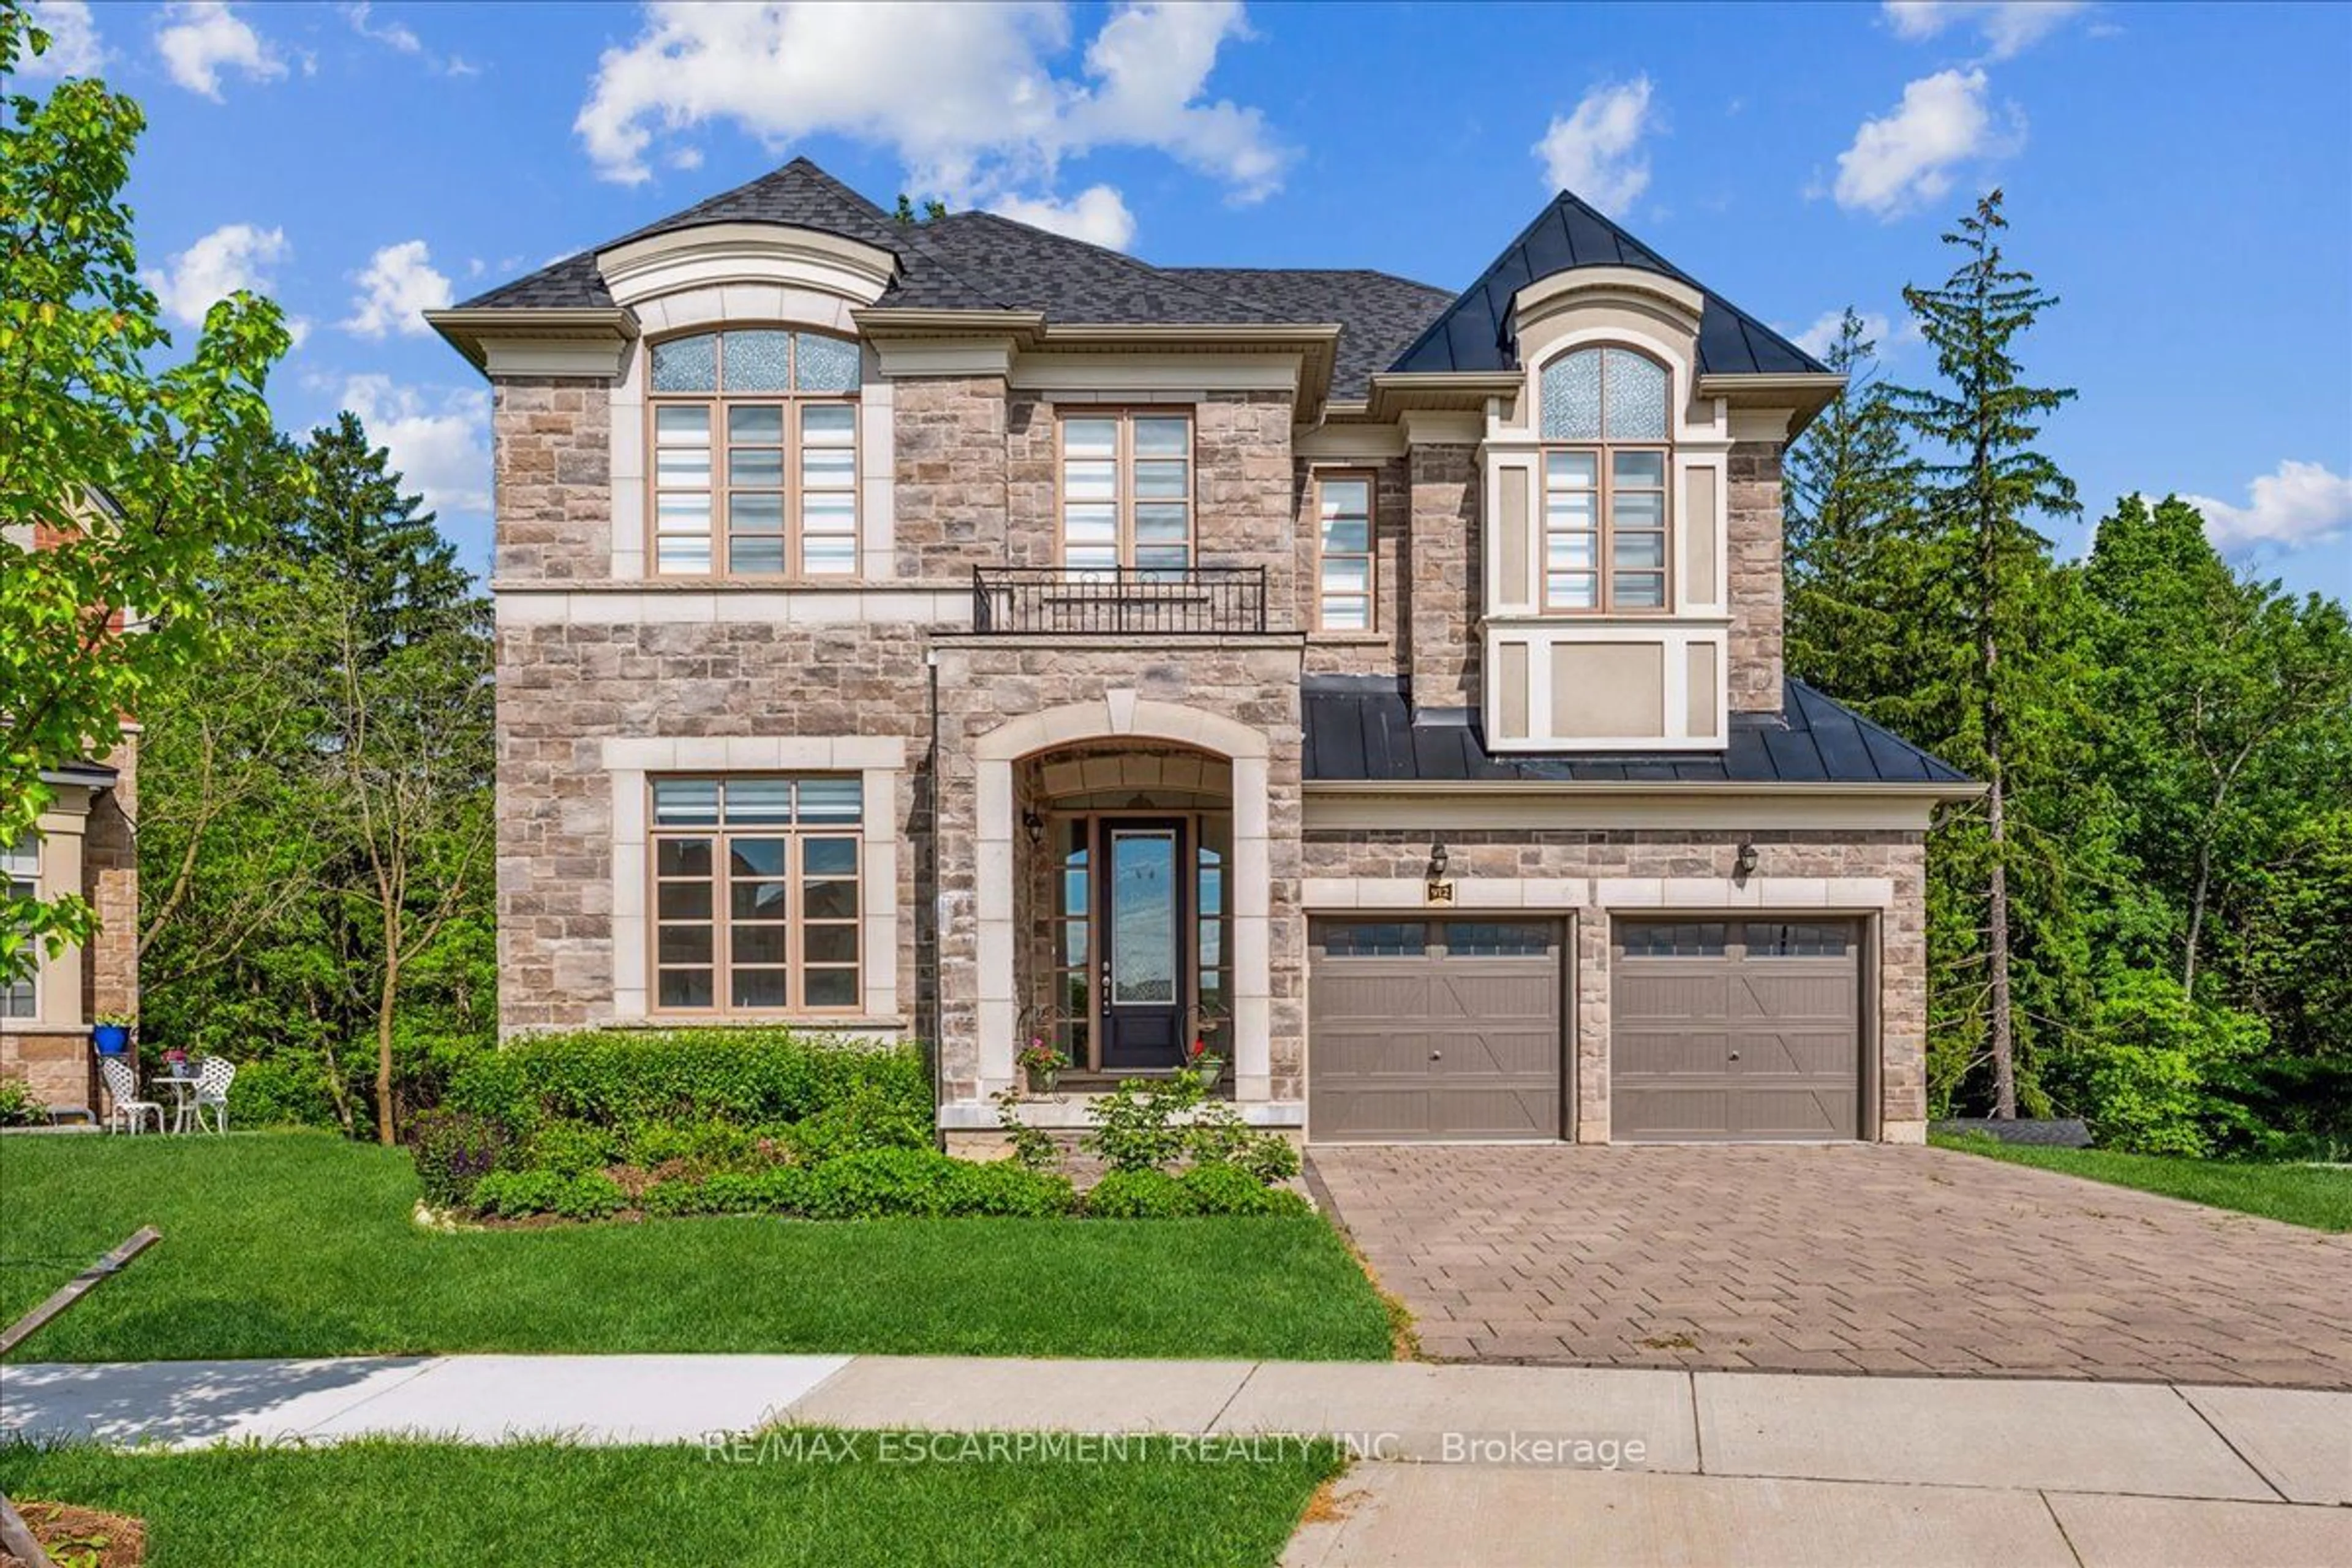 Home with brick exterior material for 912 Forest Creek Crt, Kitchener Ontario N2R 0M6